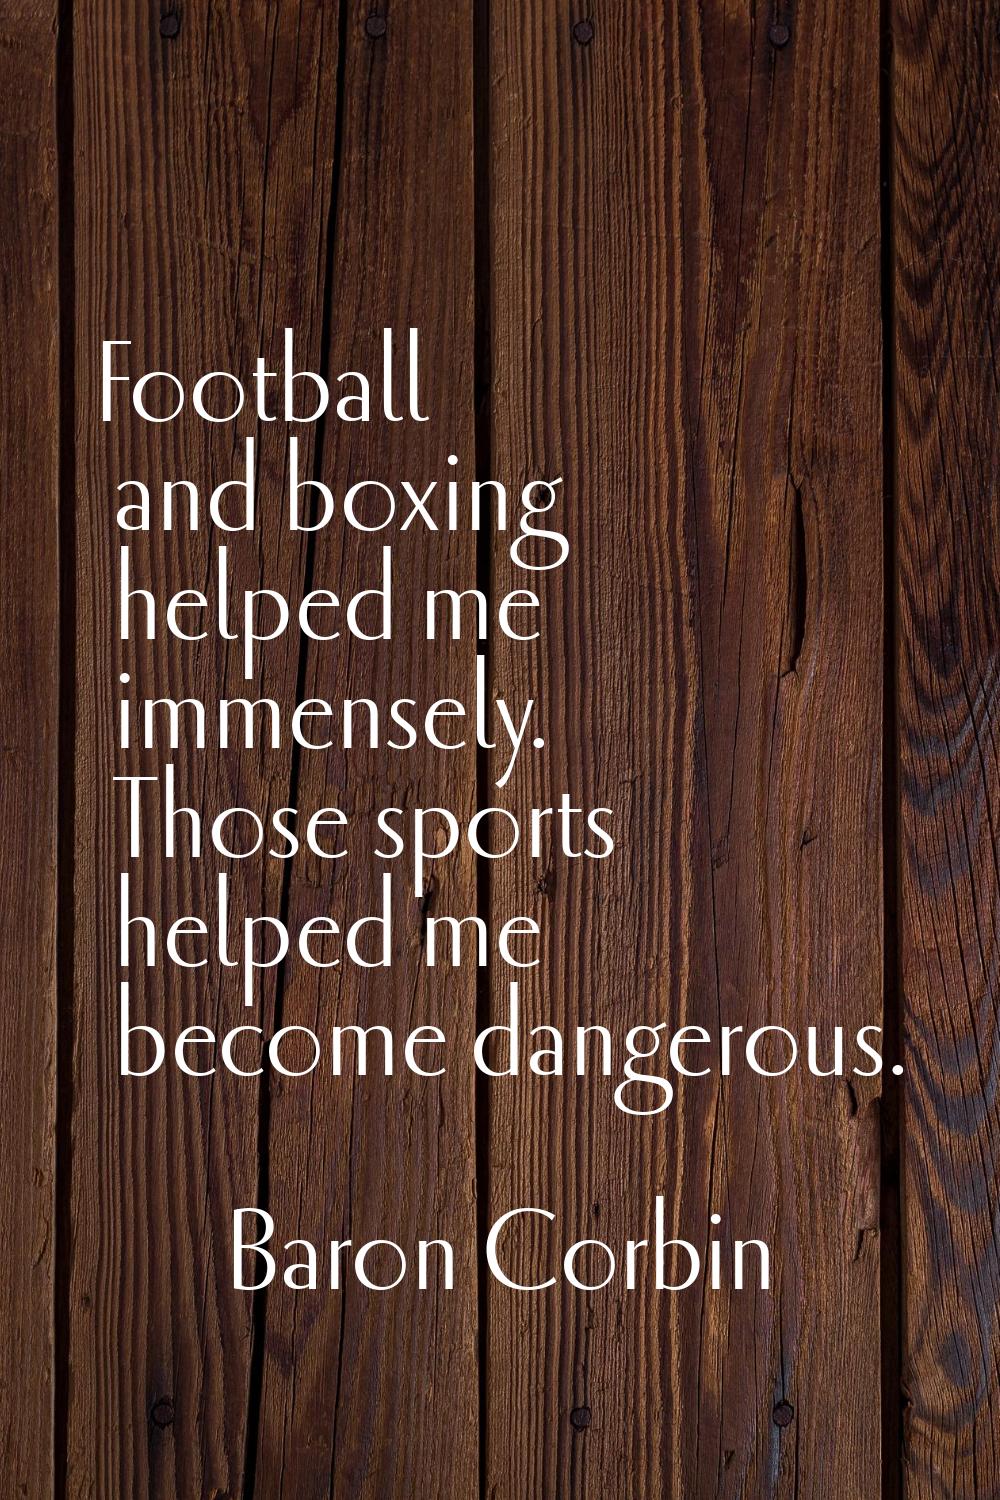 Football and boxing helped me immensely. Those sports helped me become dangerous.